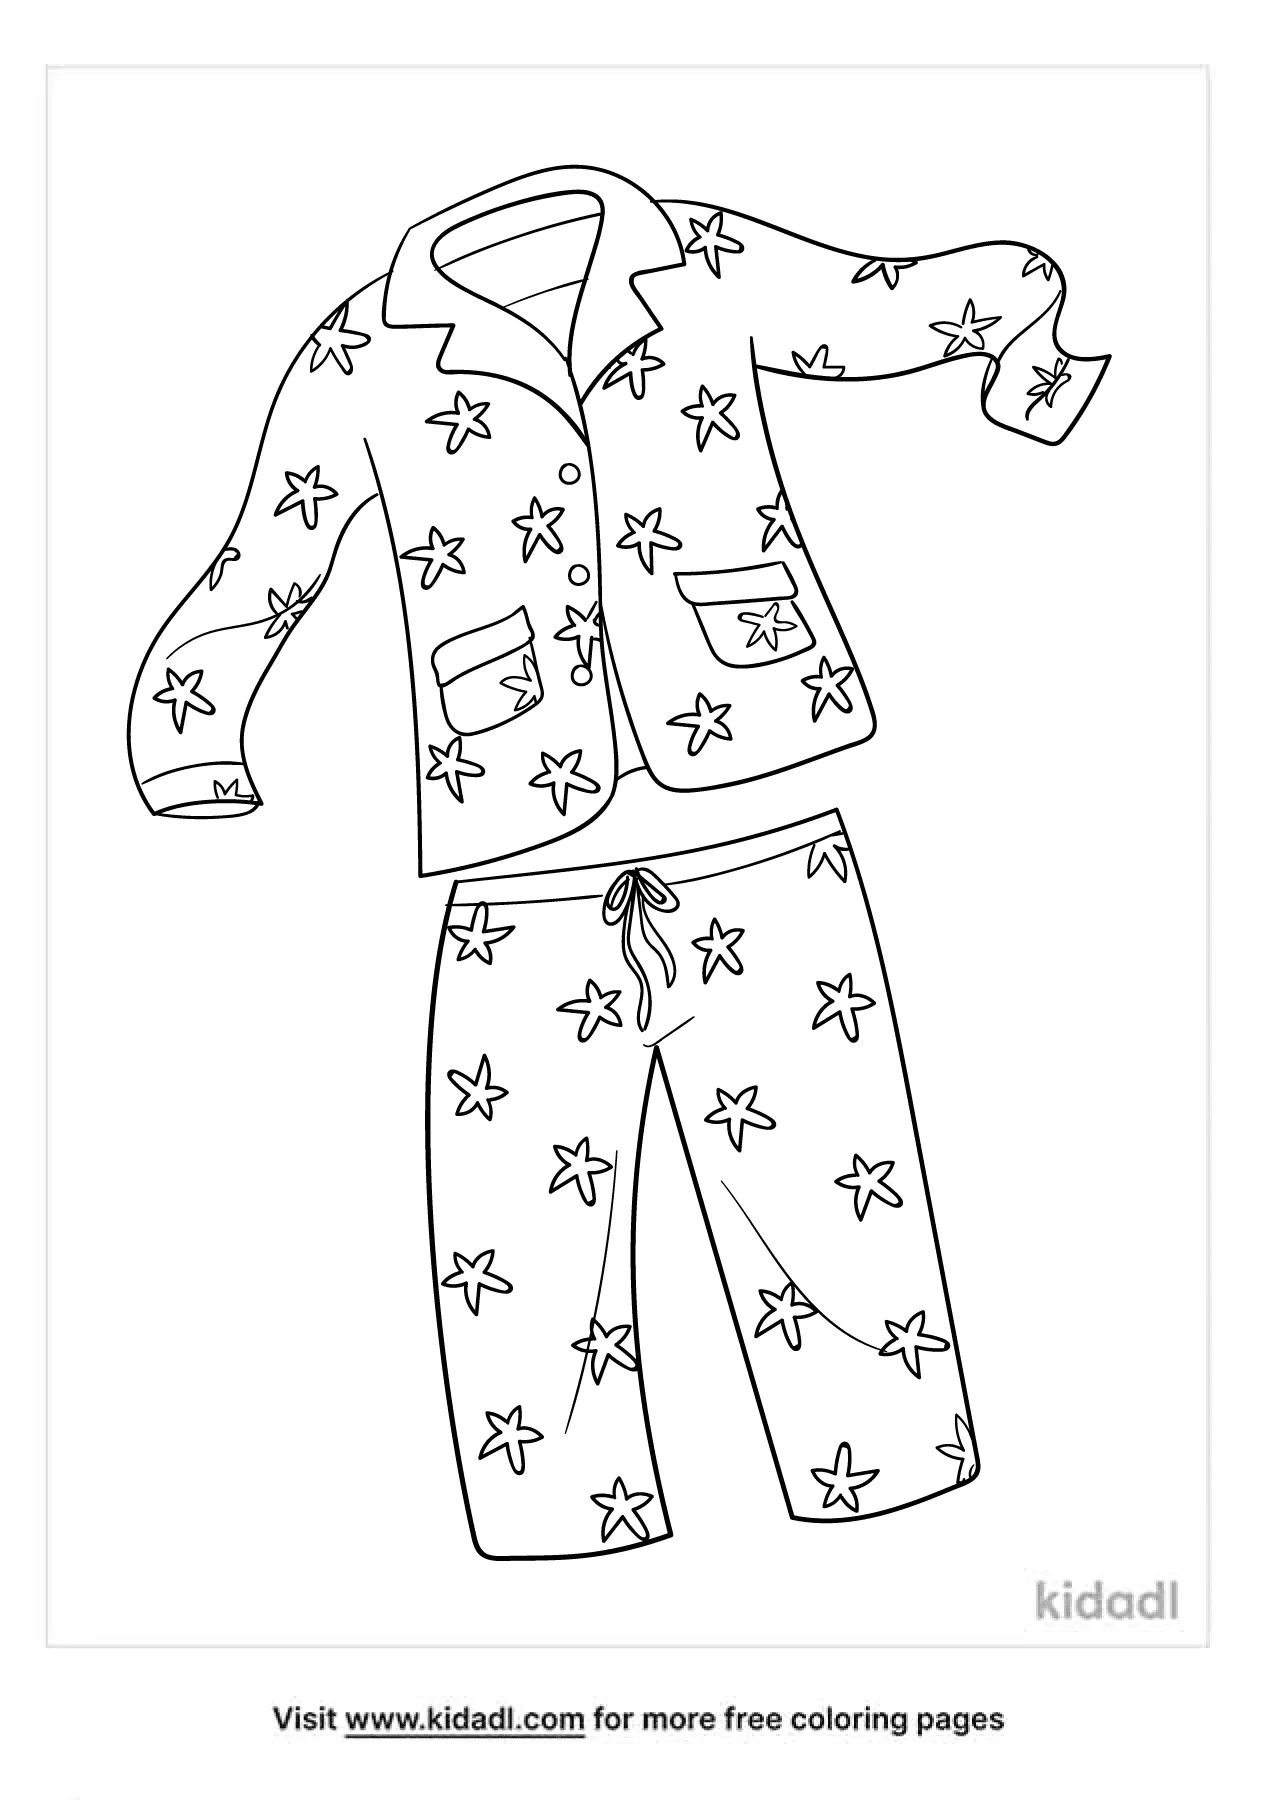 Pajamas Coloring Pages | Free Fashion Coloring Pages | Kidadl